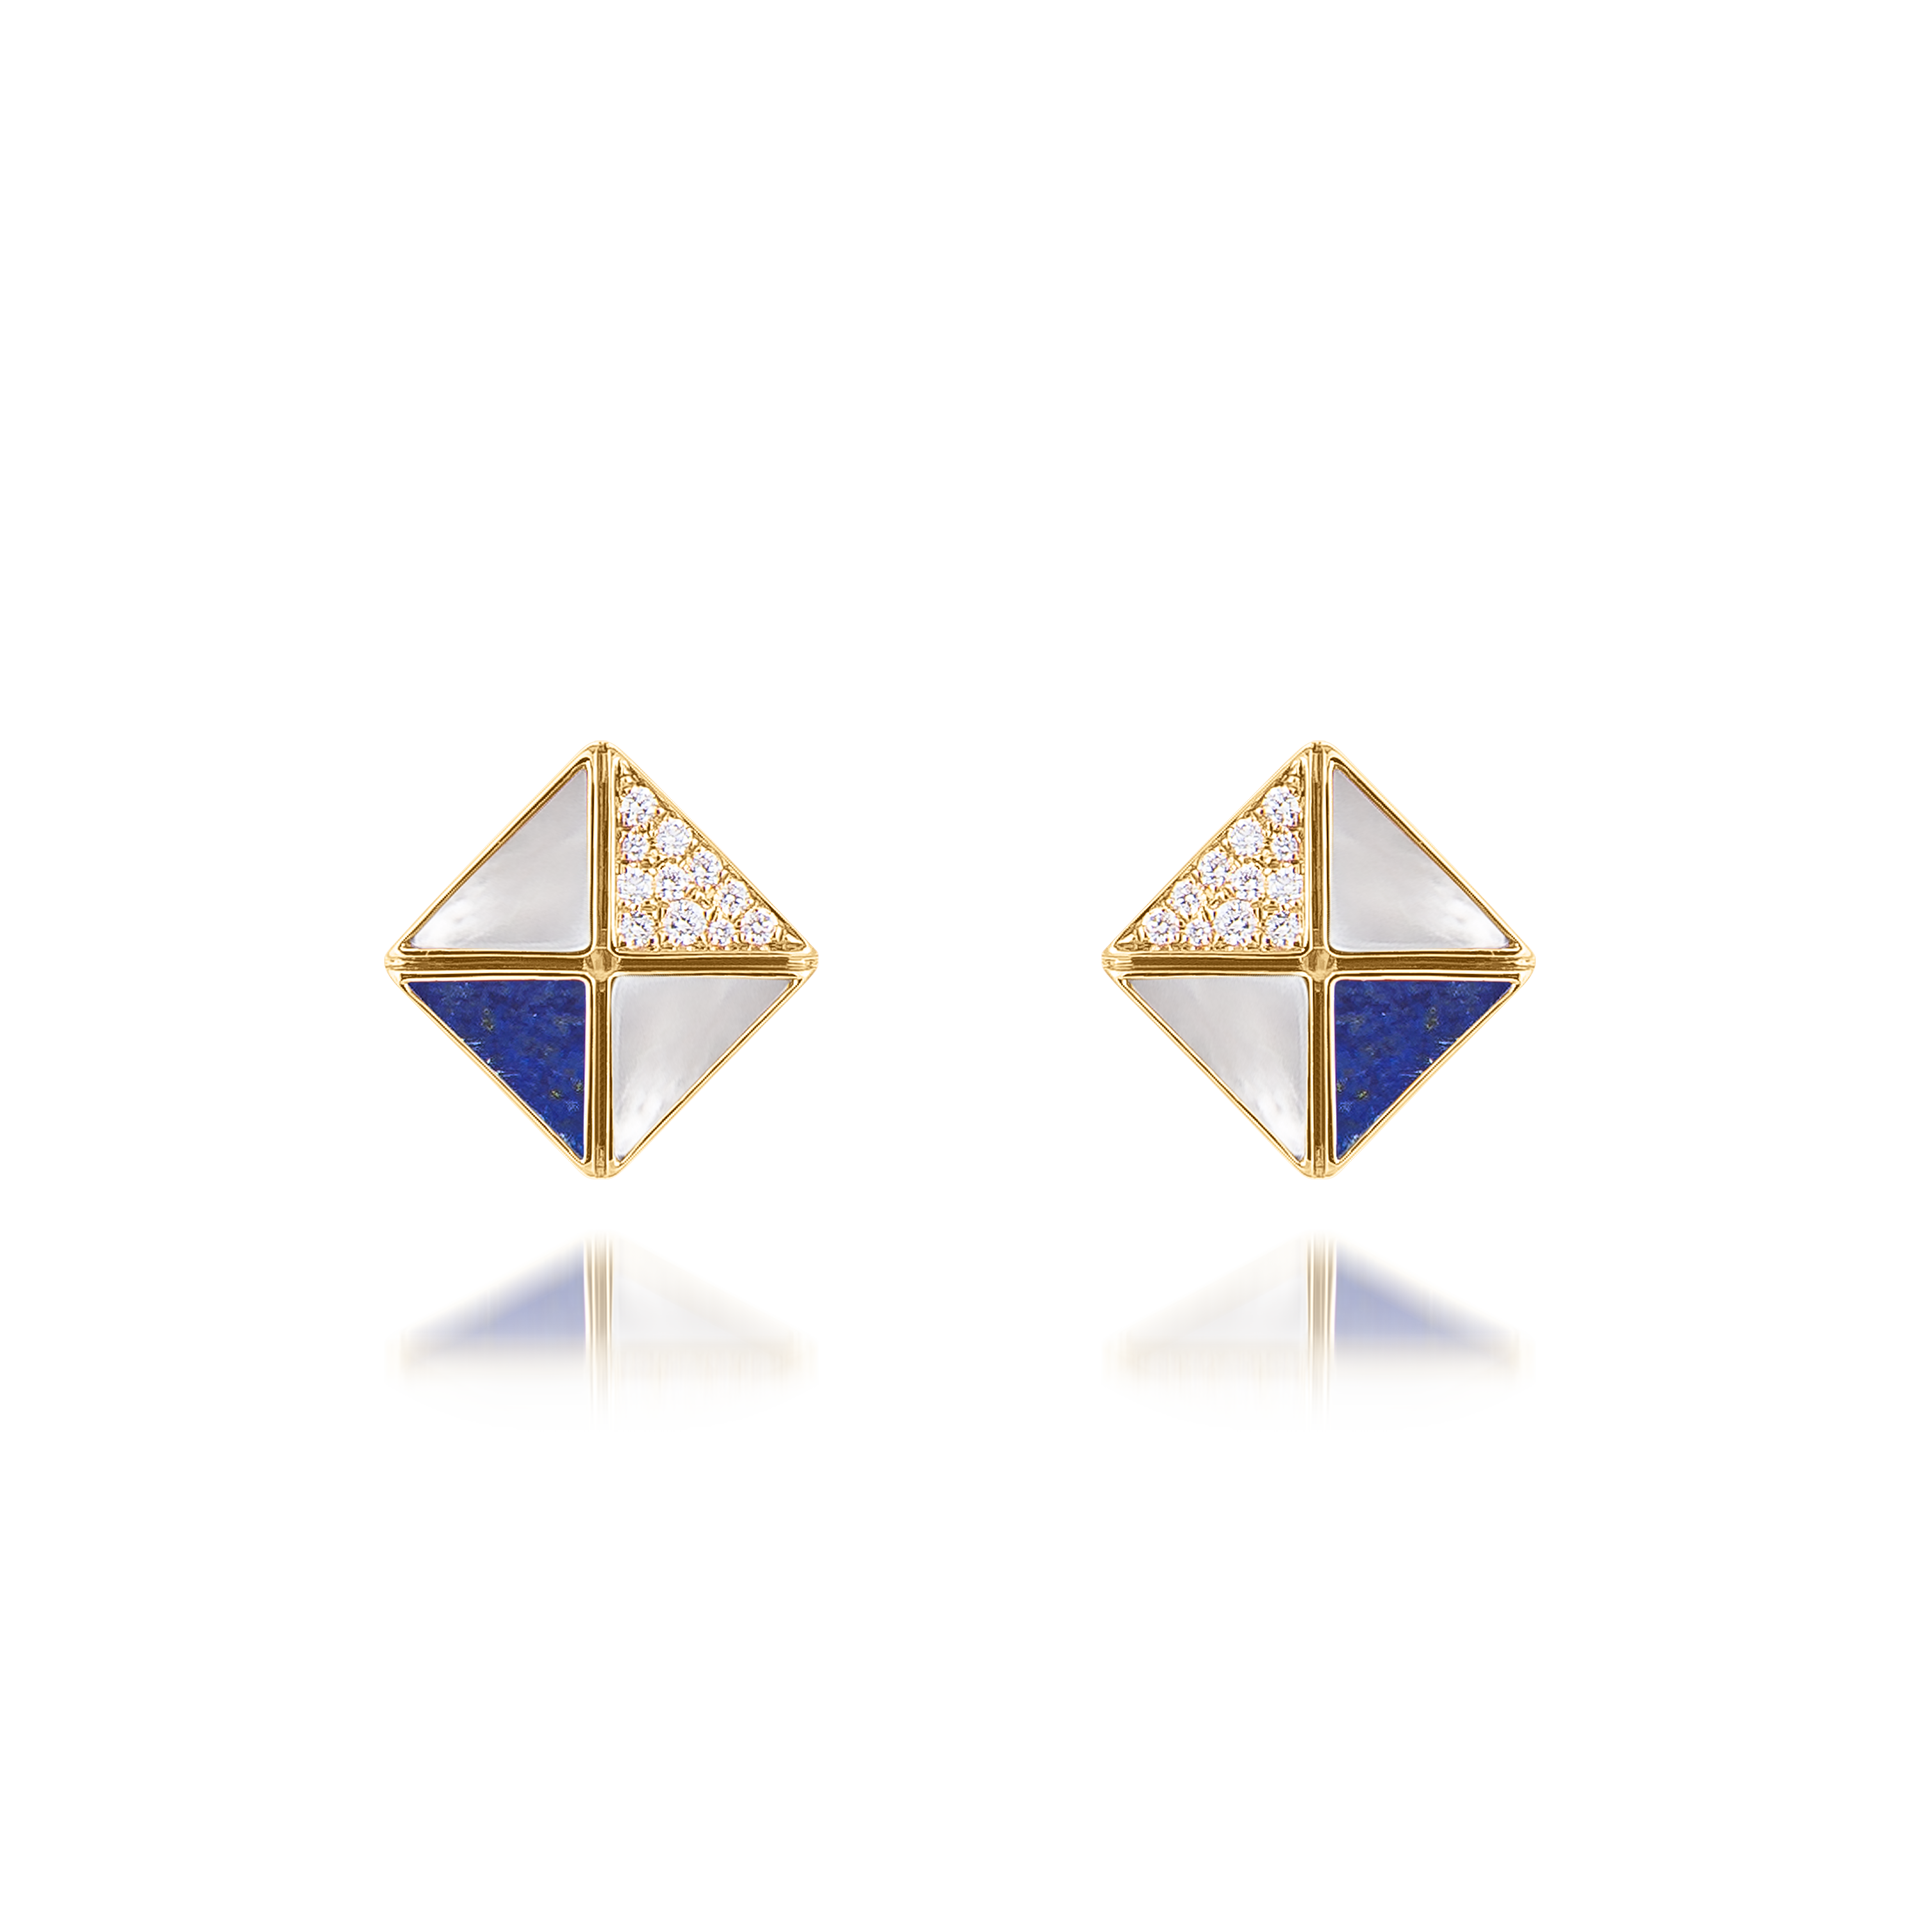 Deco Quadratic Studs with Lapis Lazuli, White Mother of Pearl and Diamonds  In 18K Yellow Gold